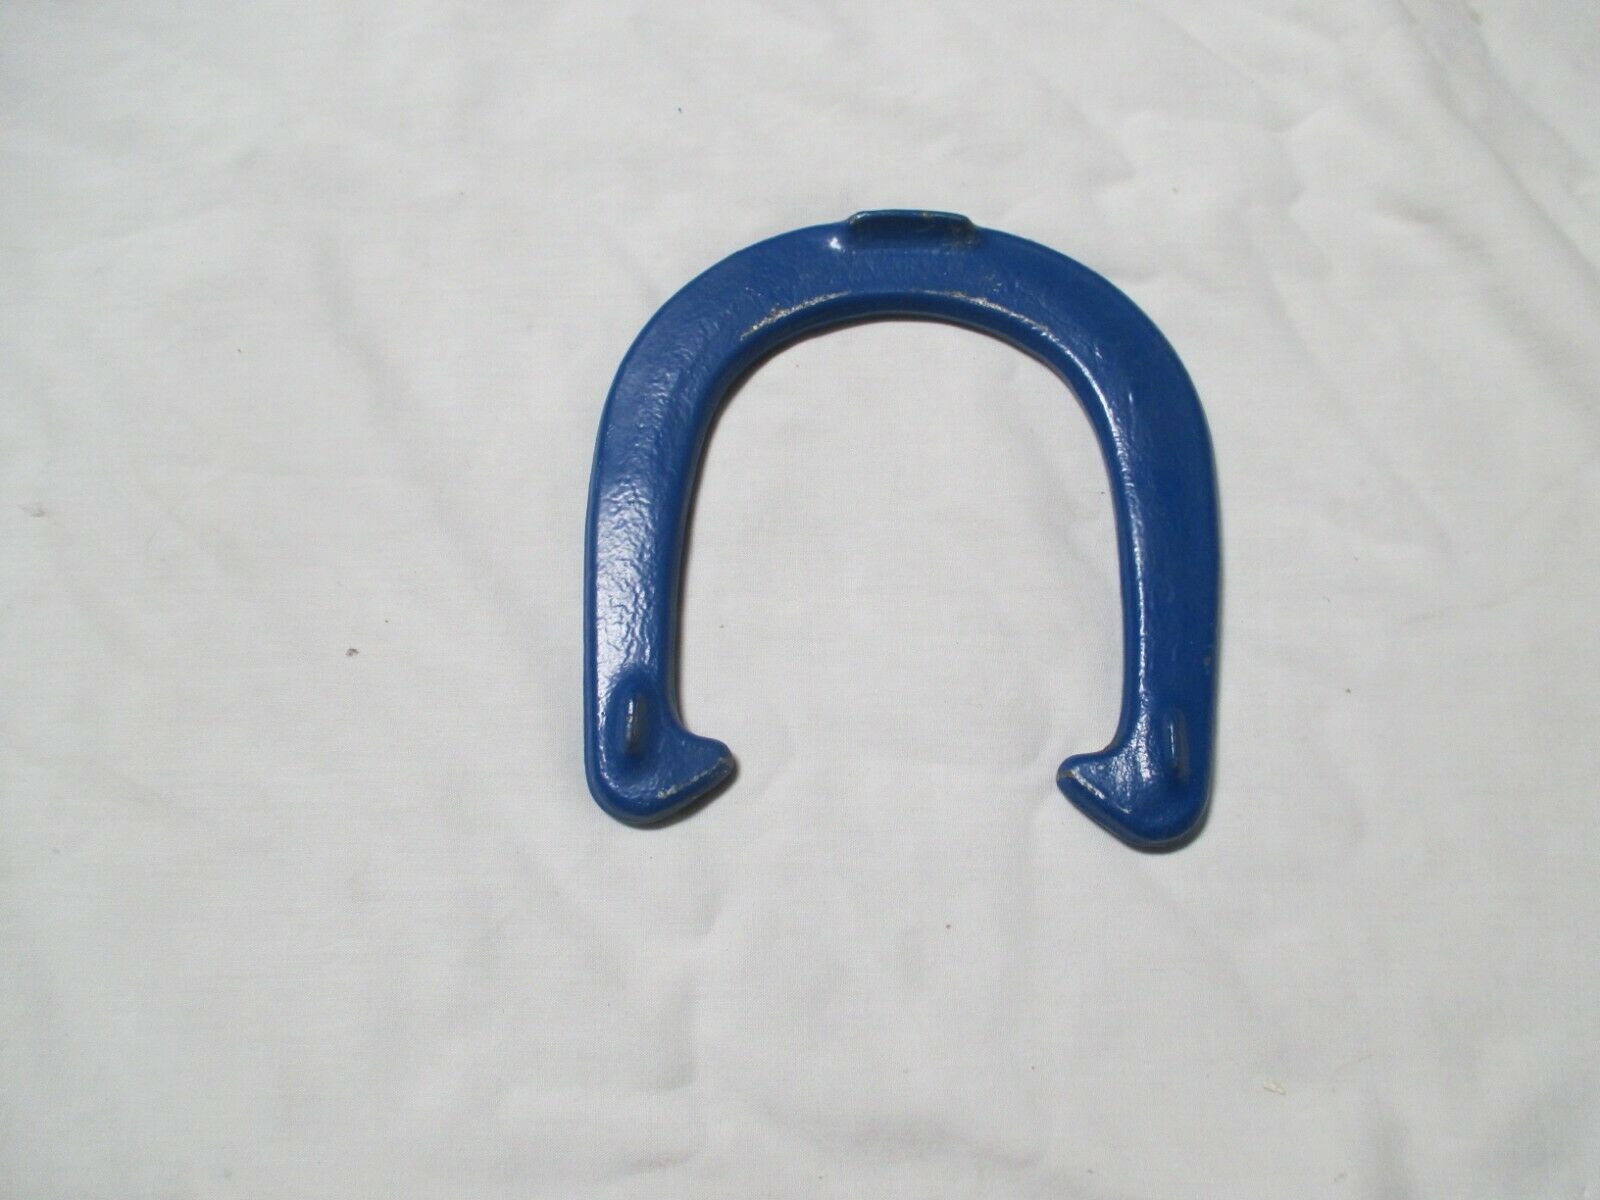 COMPETITION GRADE HORSESSHOES (CARBON STEEL SET OF 4  ROYAL BLUE)